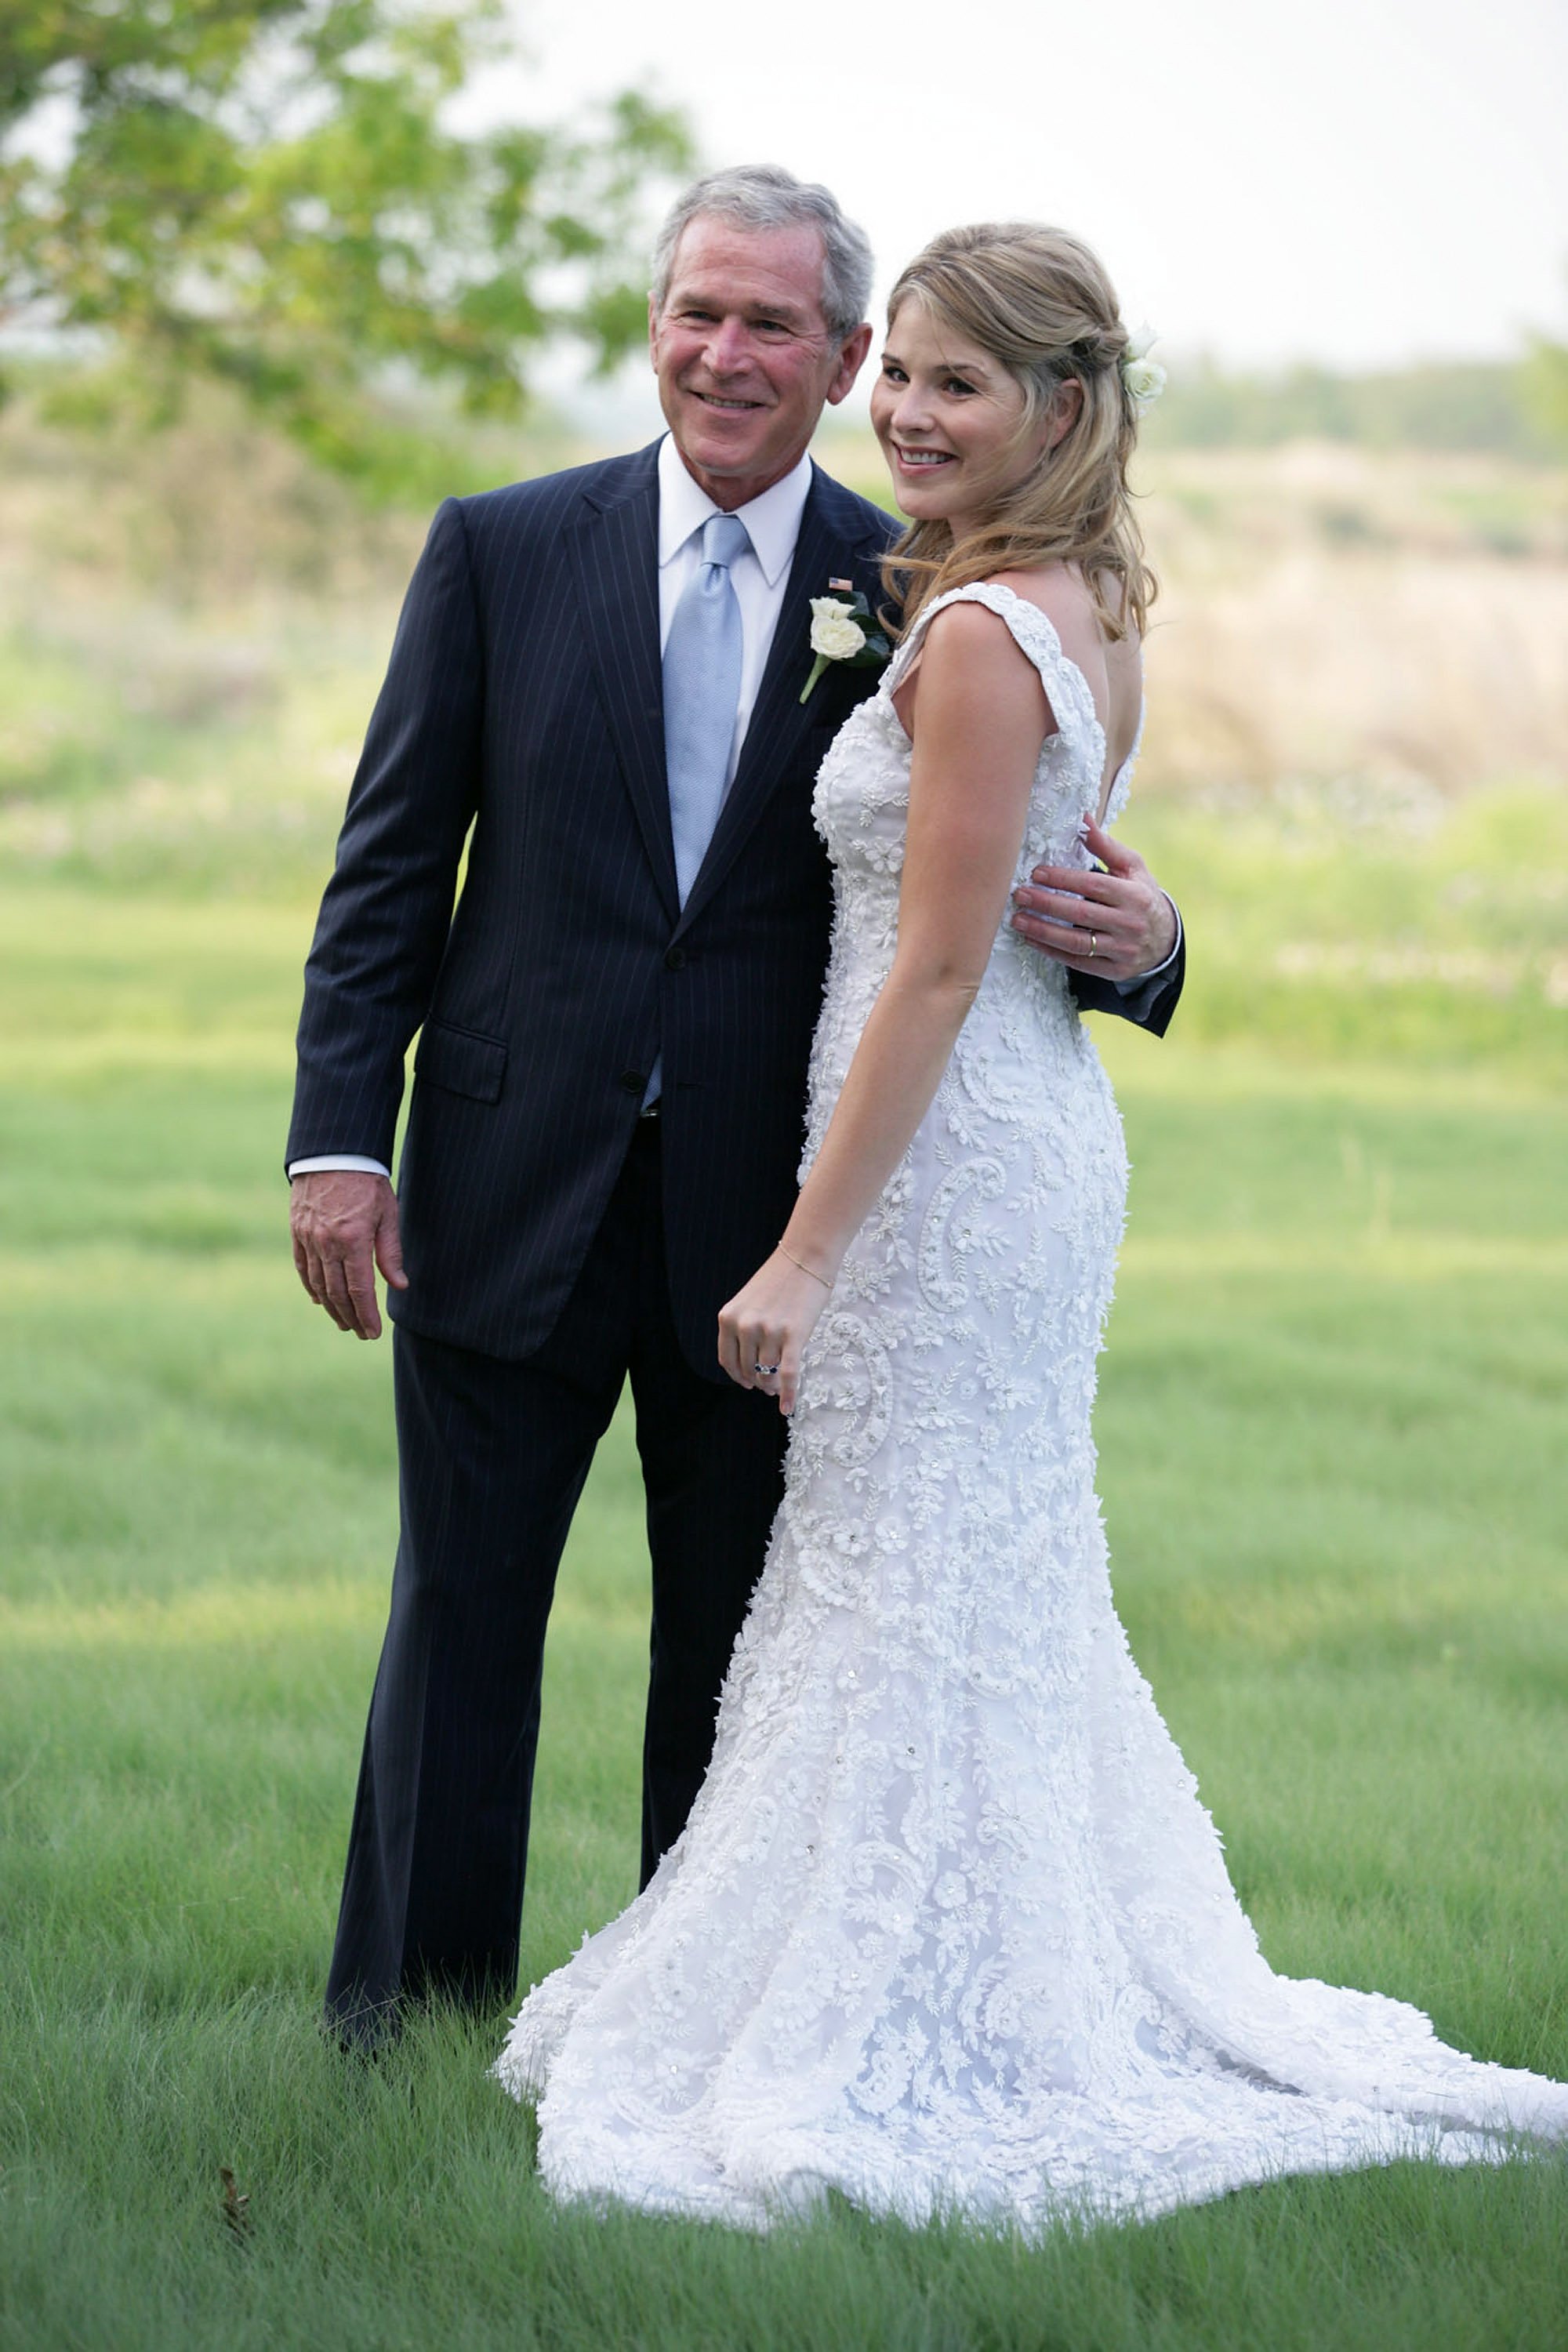 Jenna Bush Hager and her father George W. Bush pictured at her wedding at Prairie Chapel Ranch May 10, 2008. | Photo: Getty Images